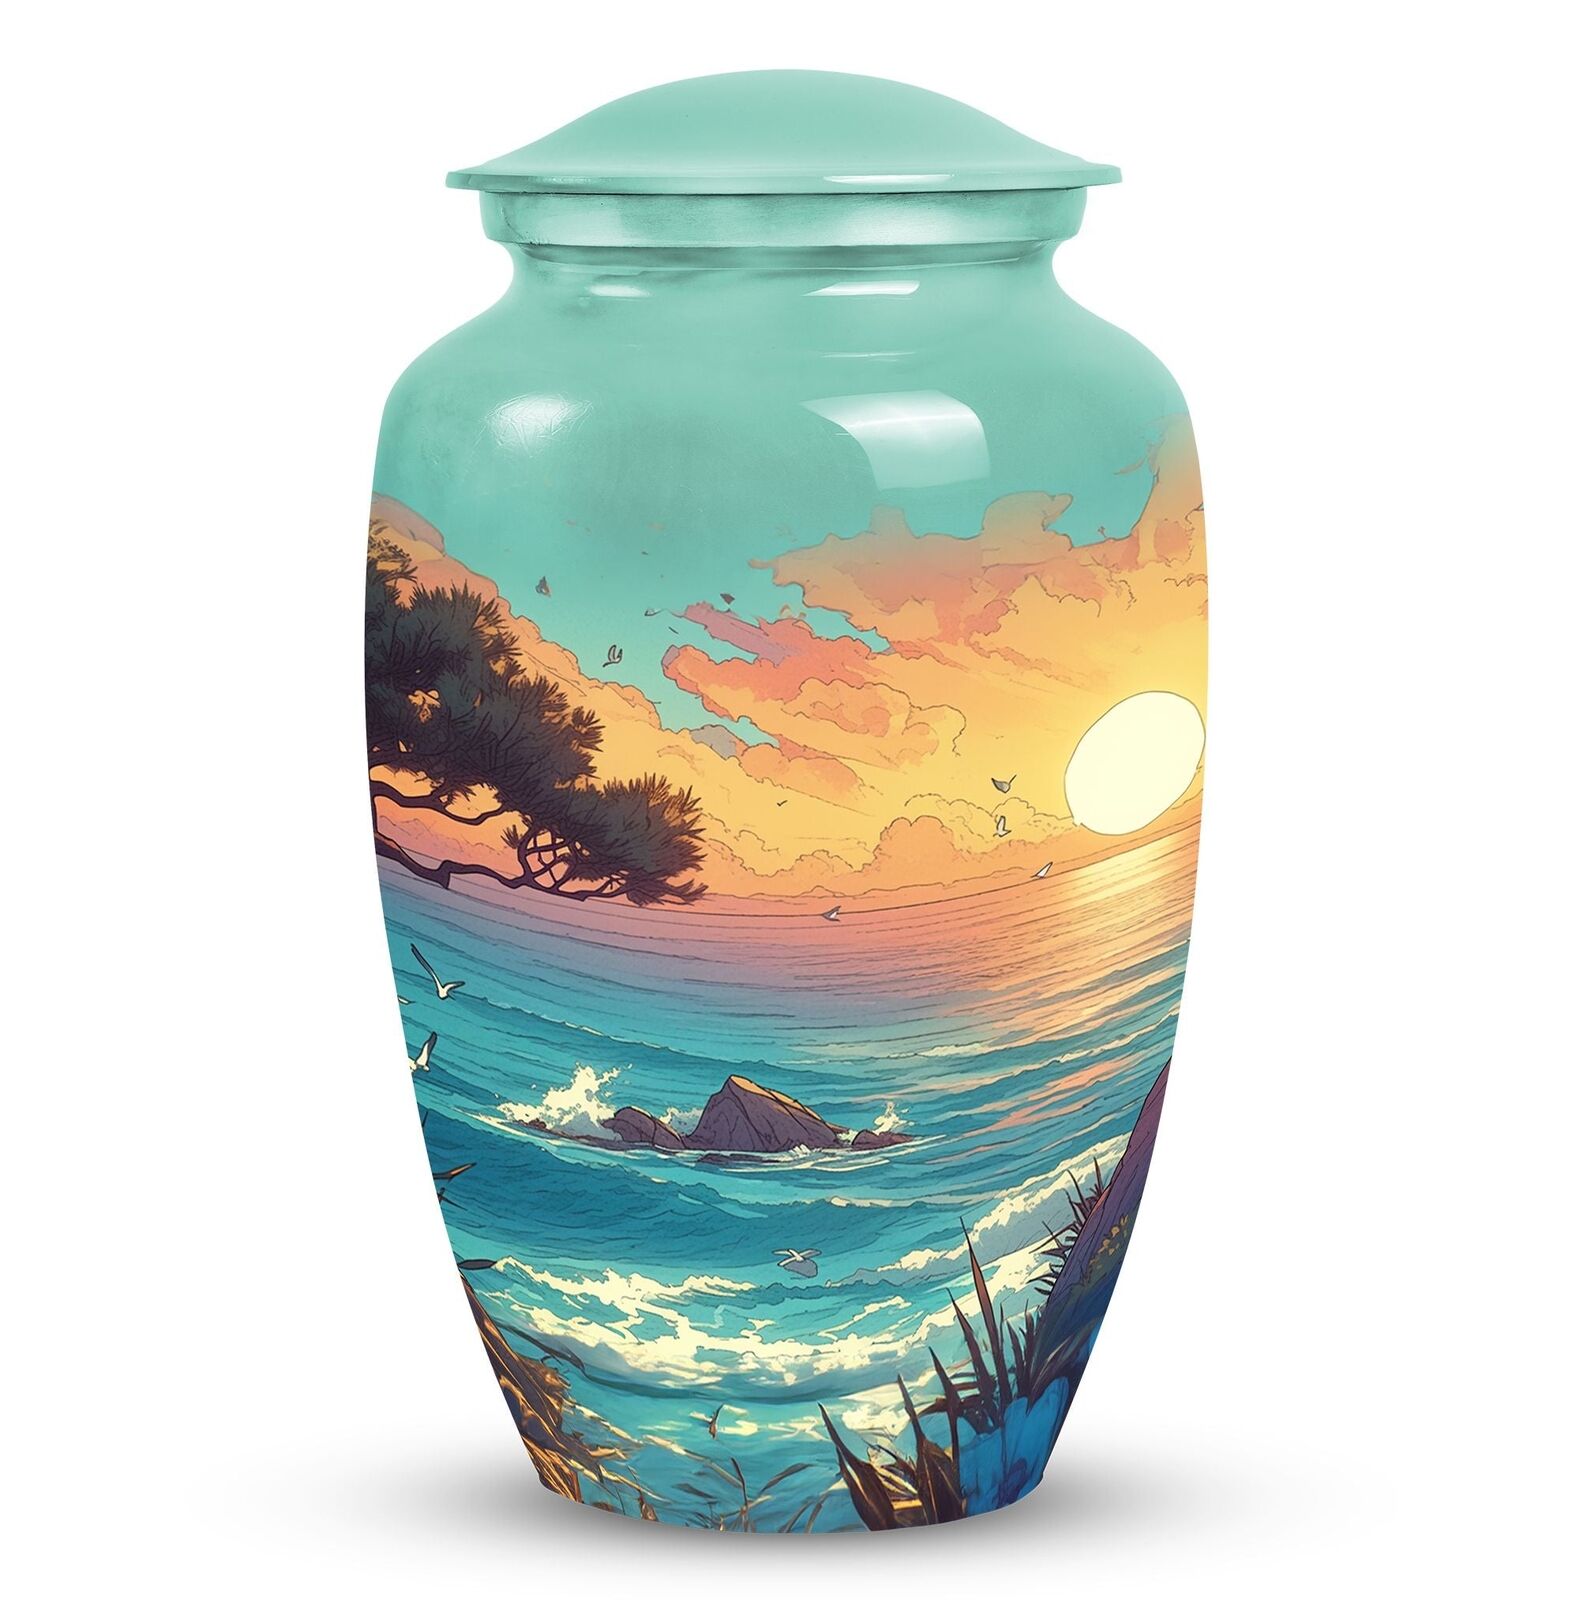 Sunset and Blue Decorative Cremation Urns for Adults & Seniors